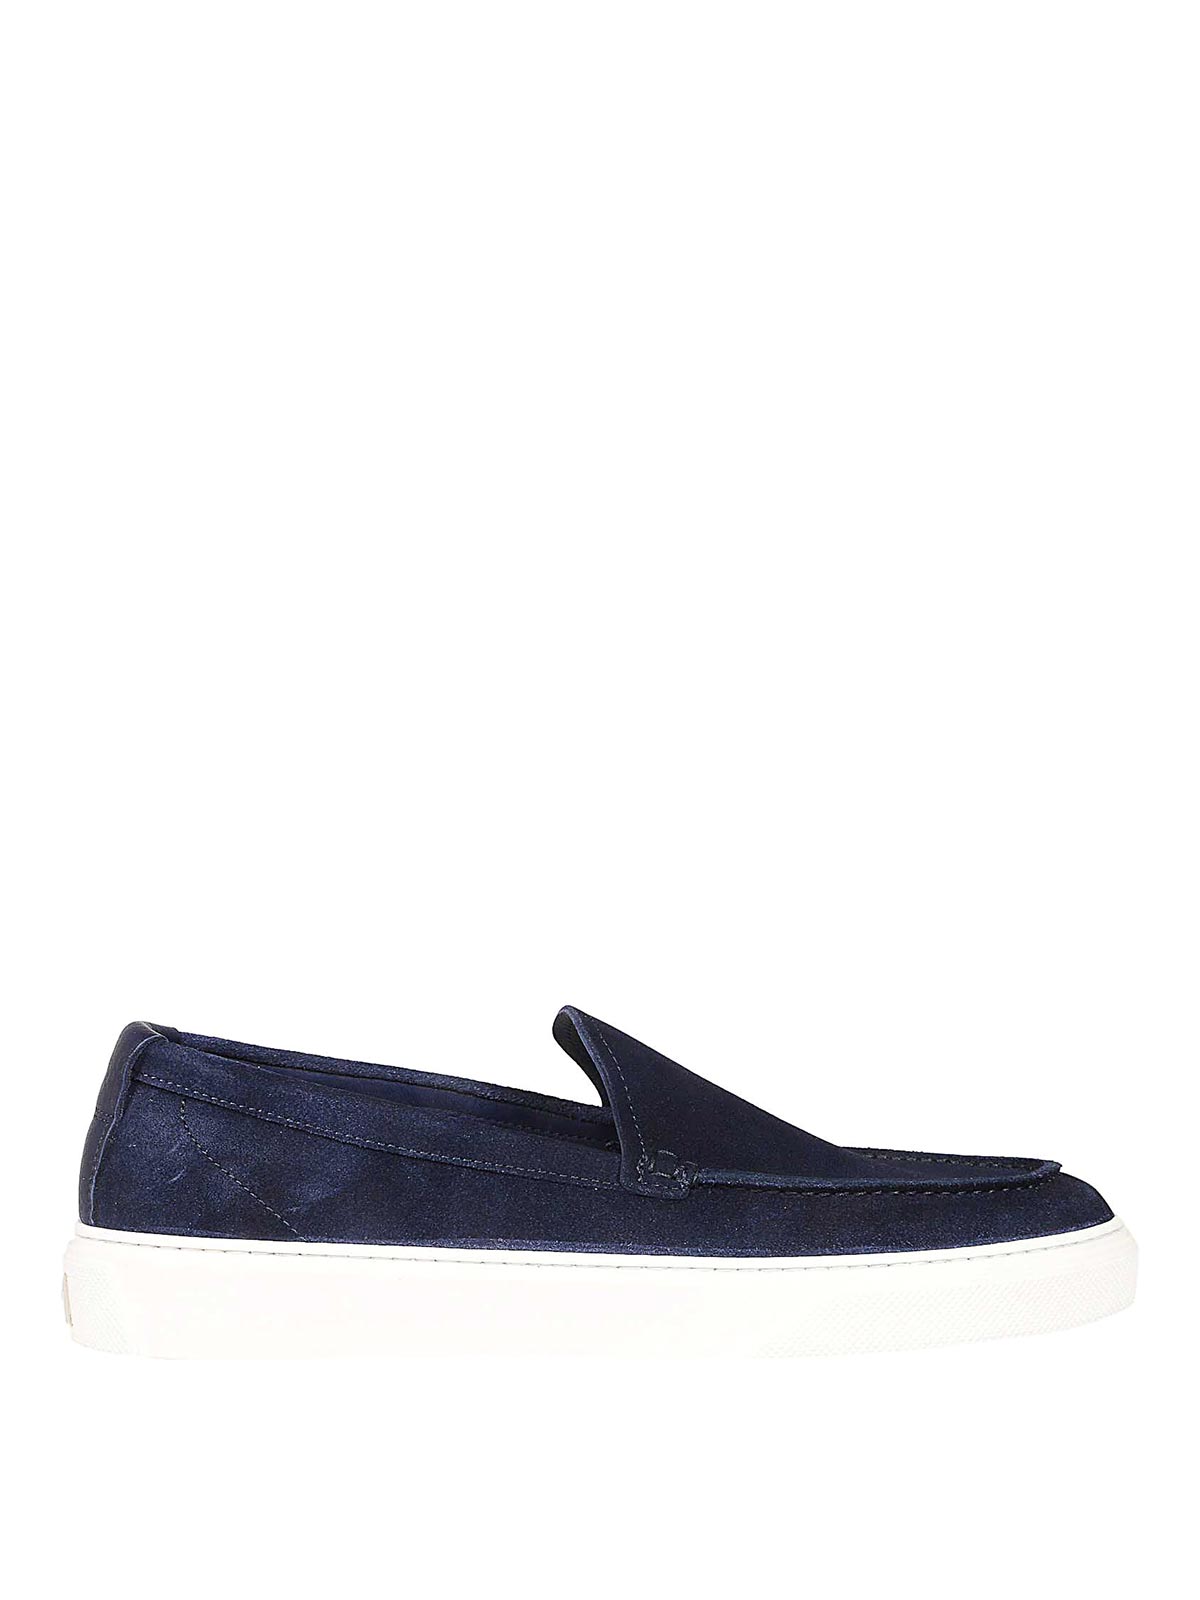 Shop Woolrich Blue Suede Loafers